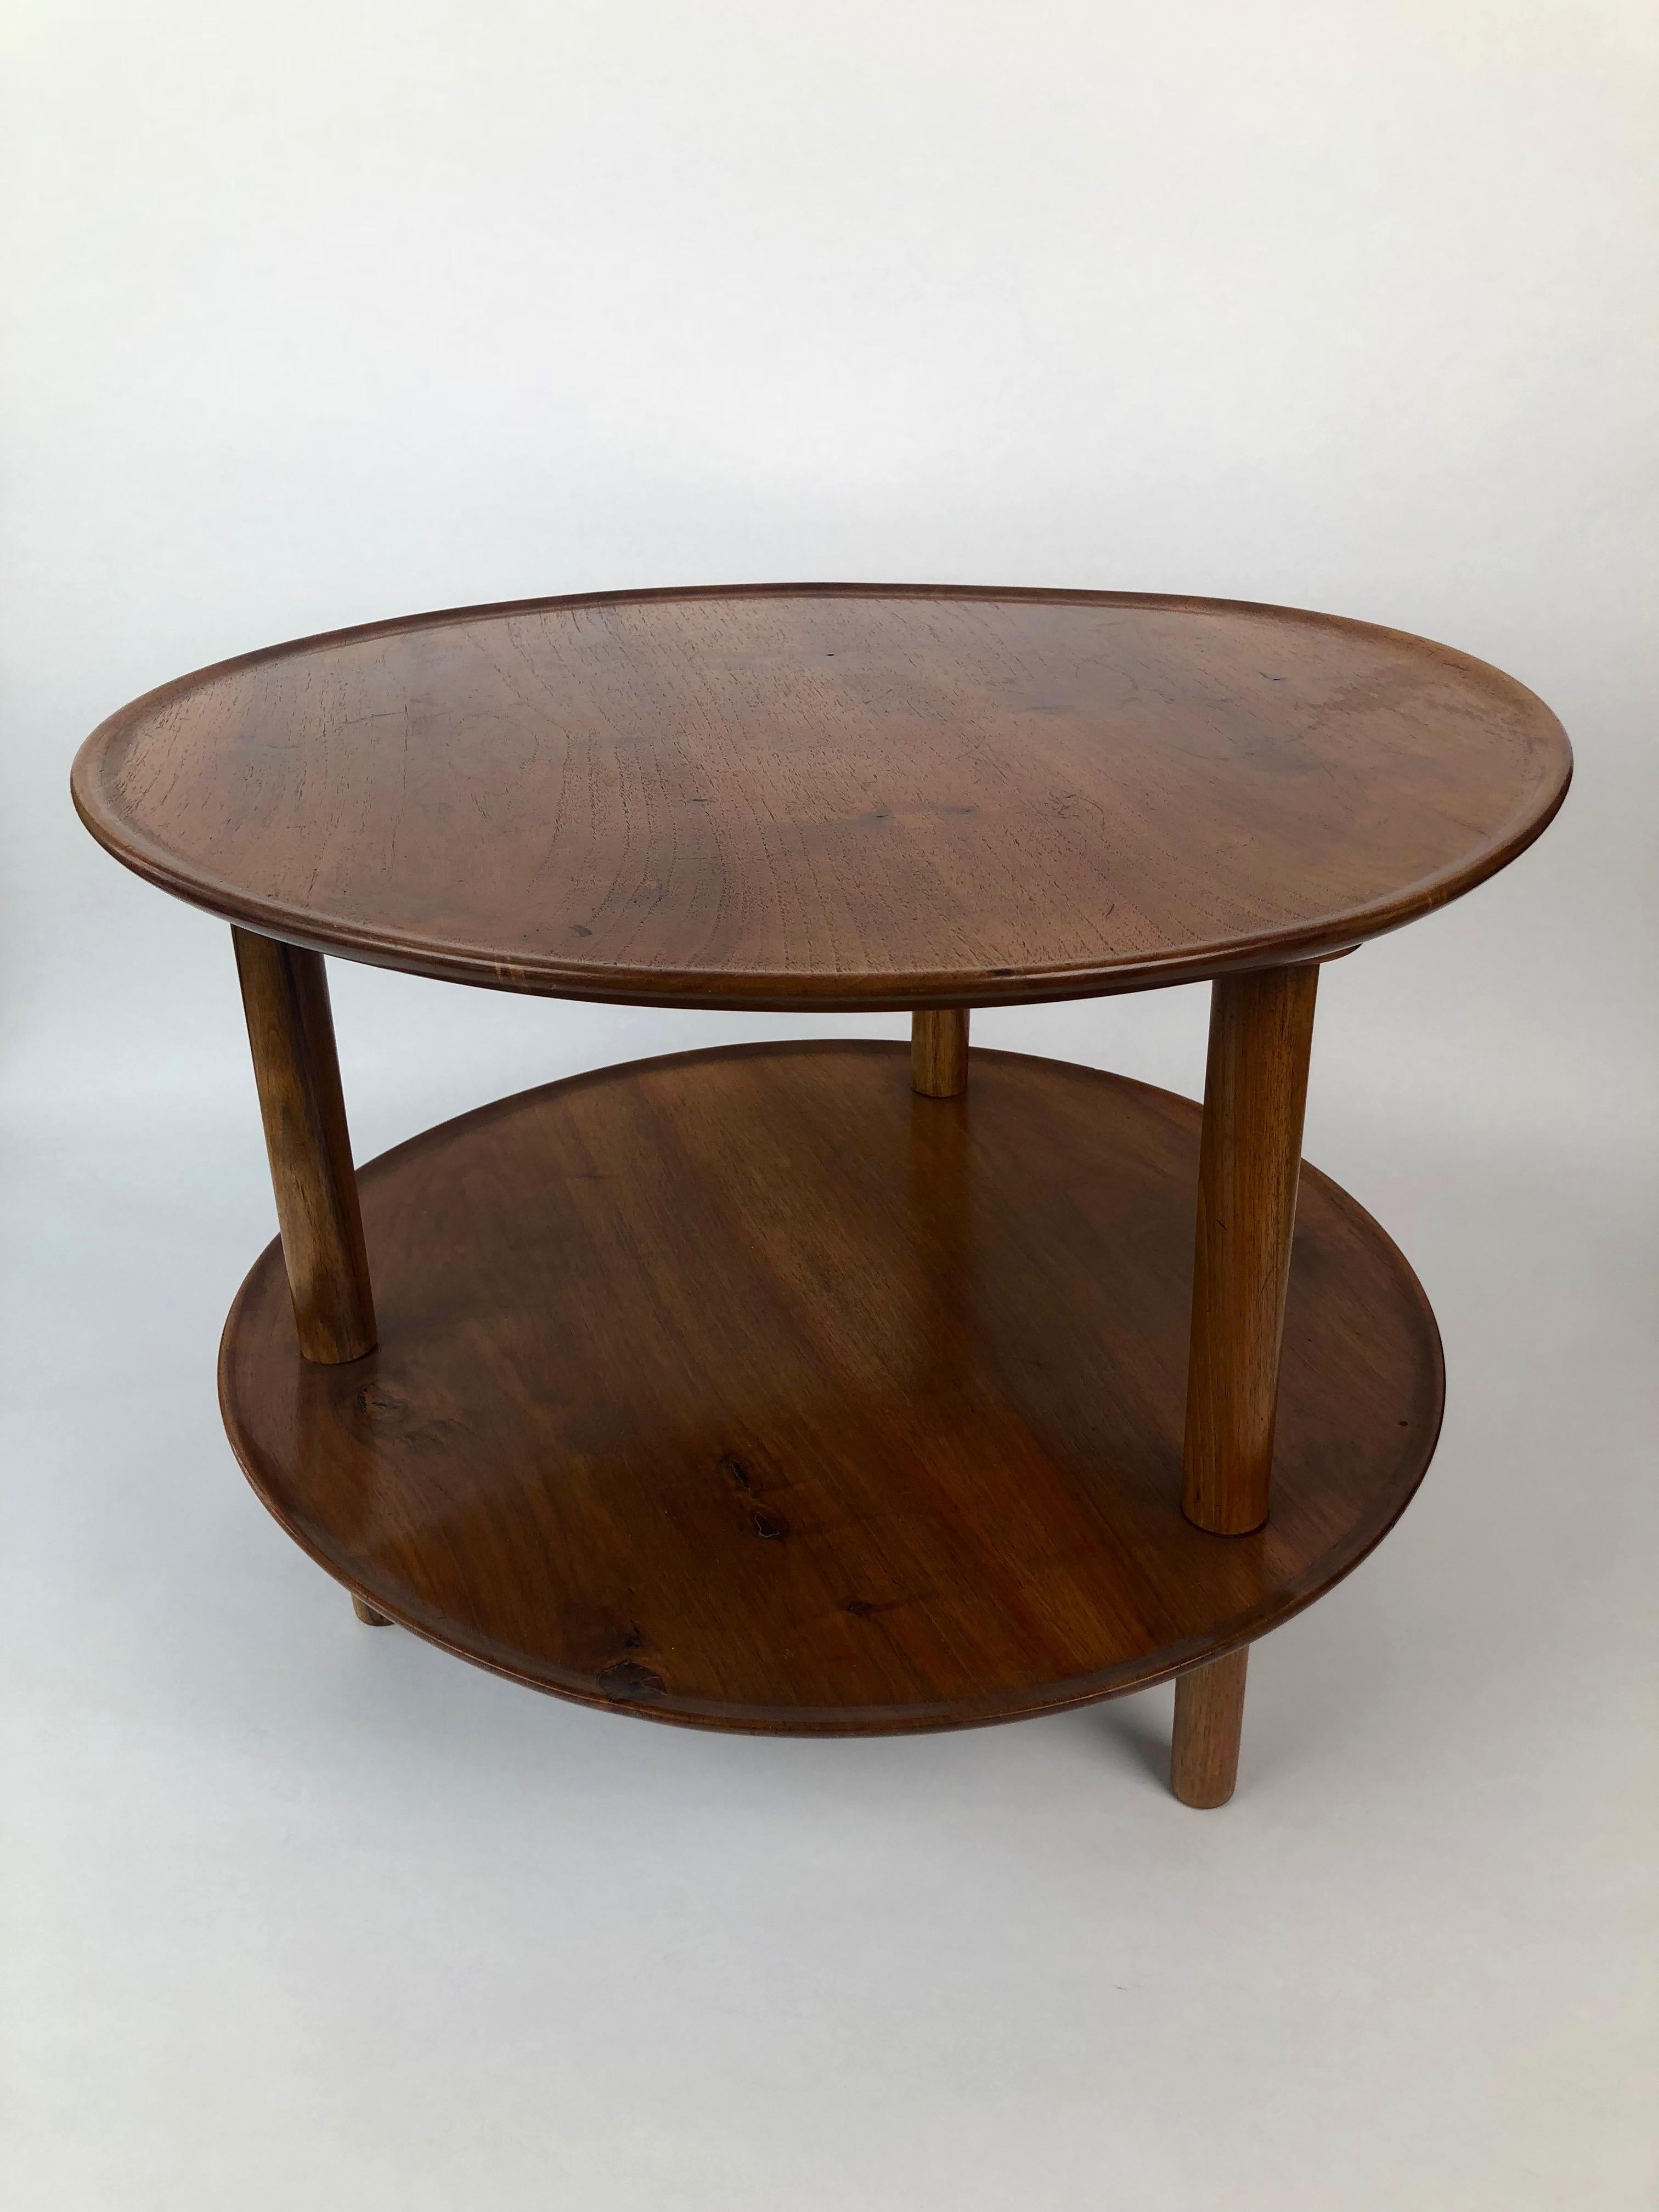 Mid-20th Century Coffee Table in Walnut from the 1930s, Designed by Josef Frank For Sale